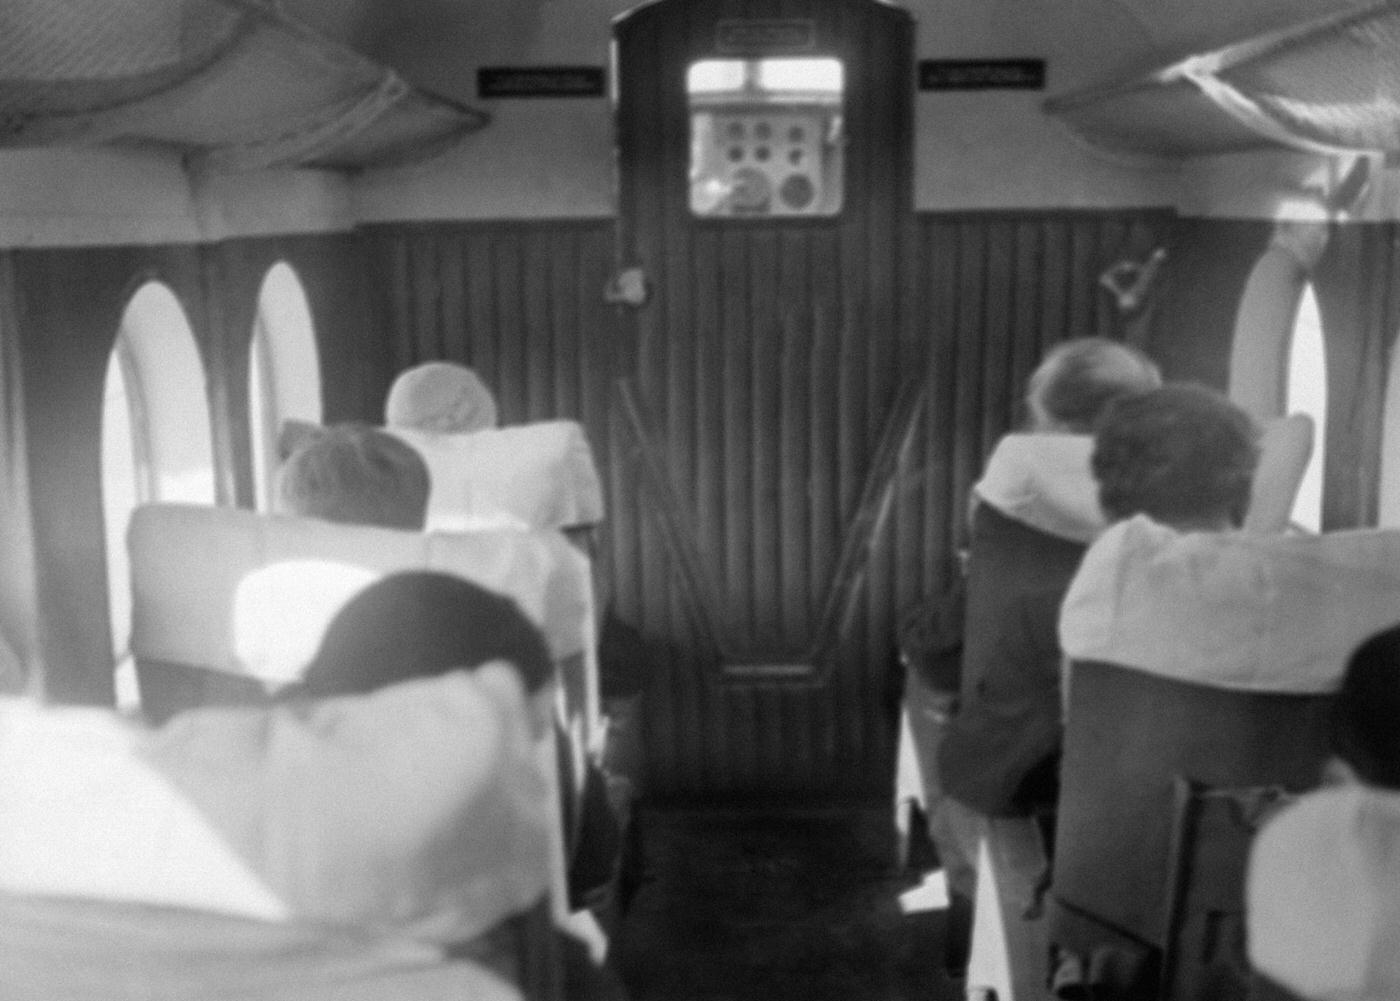 Interior of a Farman tourist airplane during a demonstration, 29th November 1932